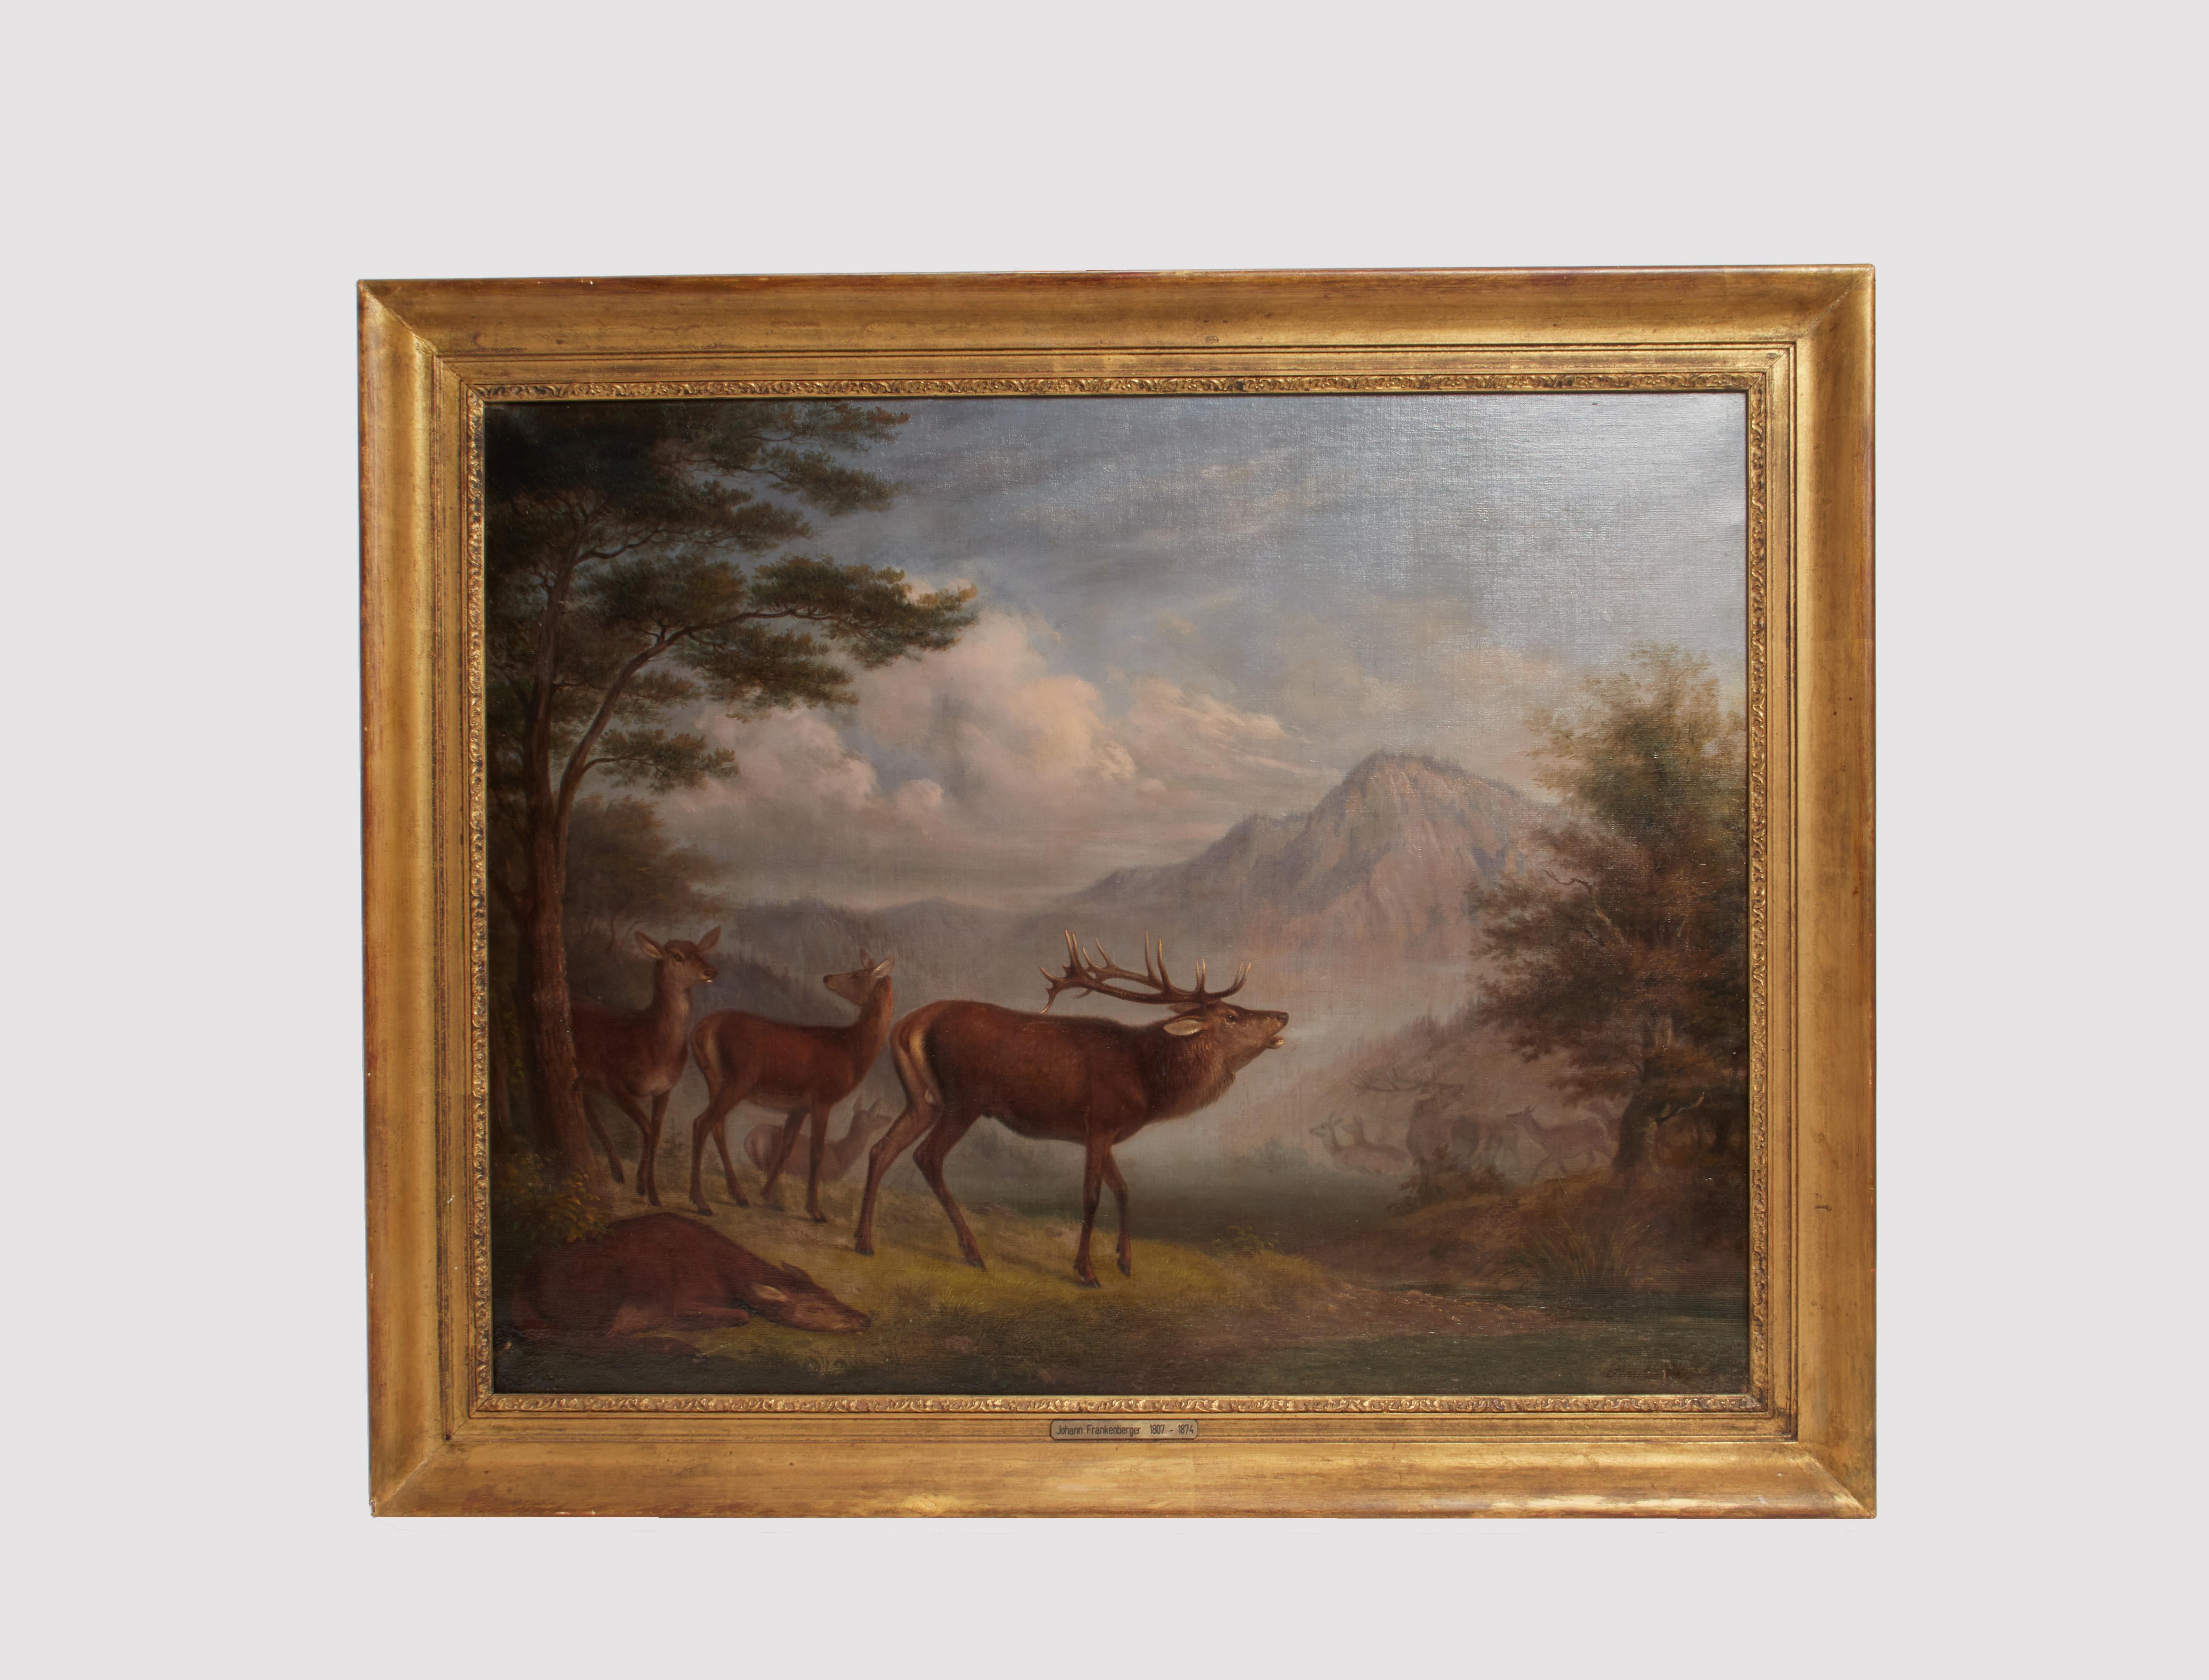 Oil on canvas painting depicting a group of wild stags in a mountain landscape od romantic taste. Golden gilt fruitwood frame. Signed:  Johann Frankenberger (Hadamar 1807 - Wien 1874), renowned painter of intense portraits (including the official